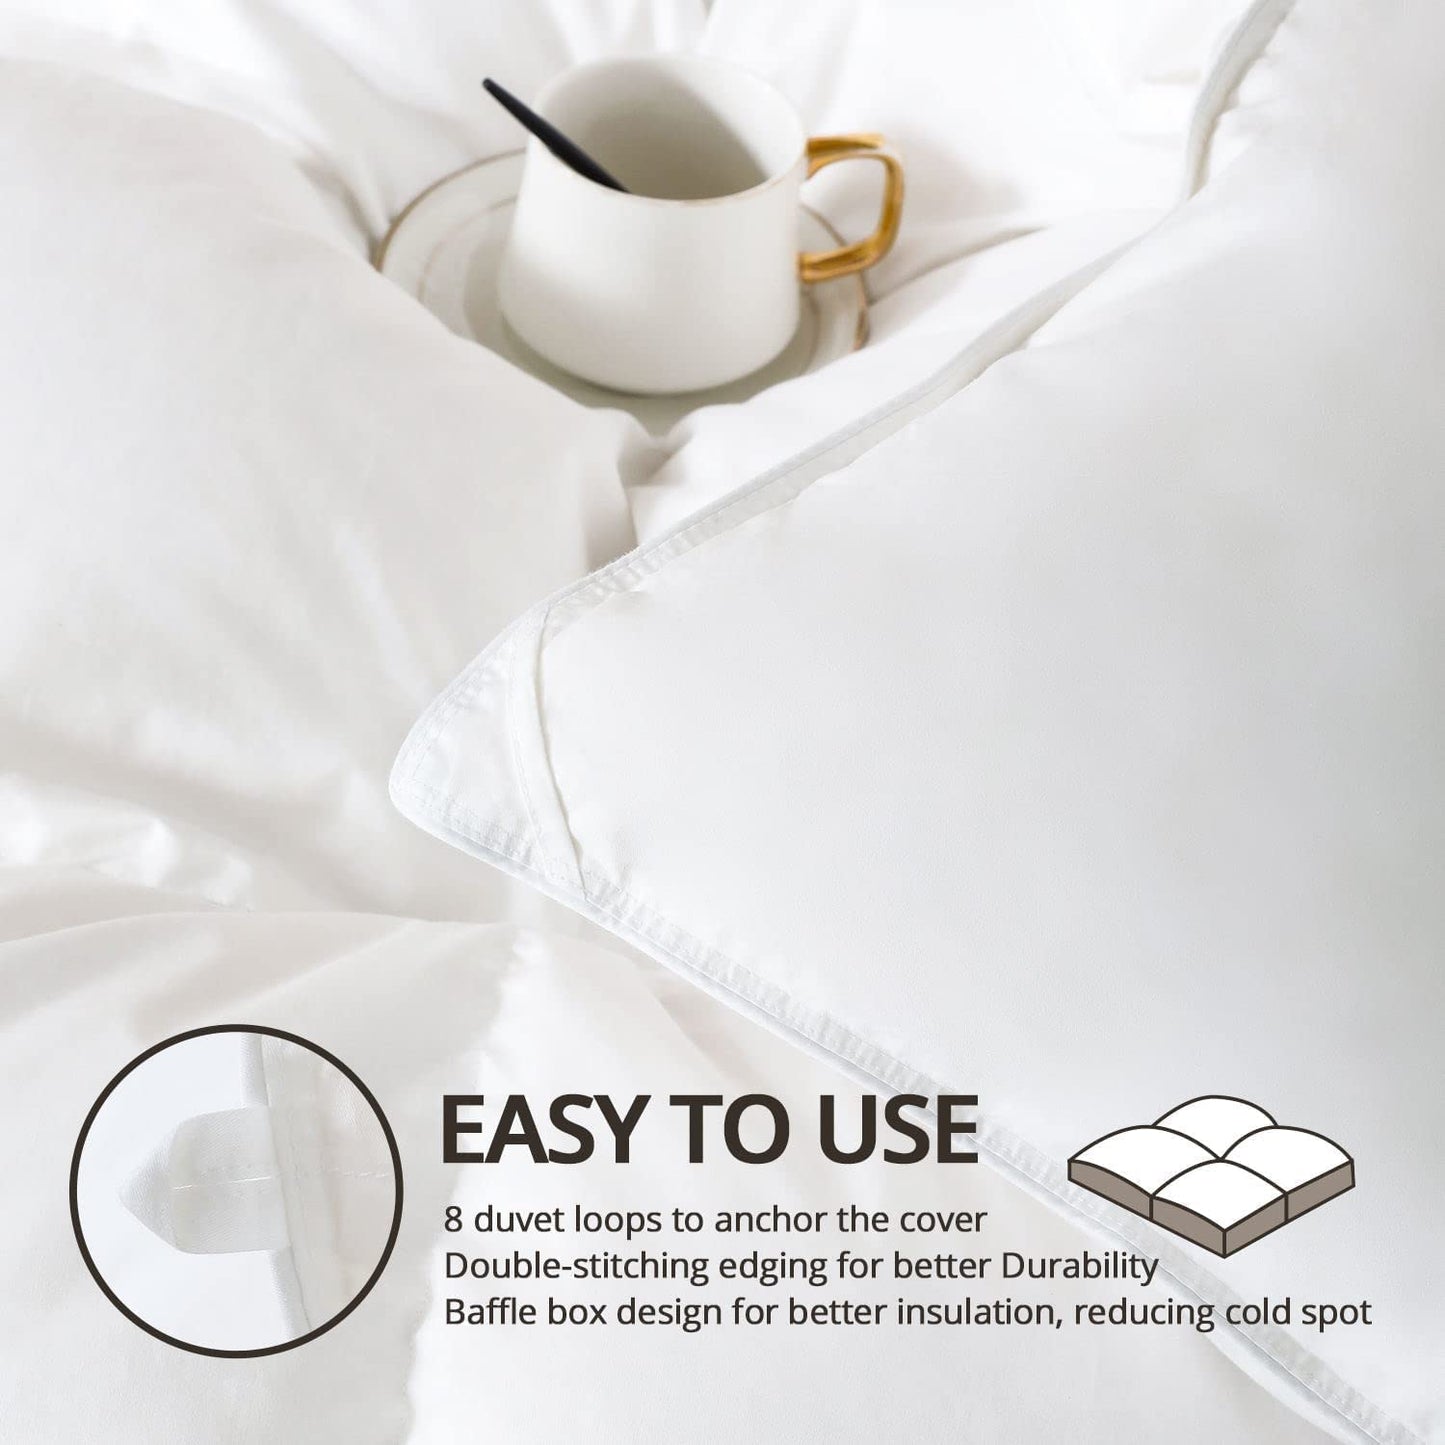 Fluffy down Comforter King Size，Medium Warmth Duvet Insert for All Season,Ultra-Soft Cotton Shell,680 Fill Power,With Corner Tabs, White